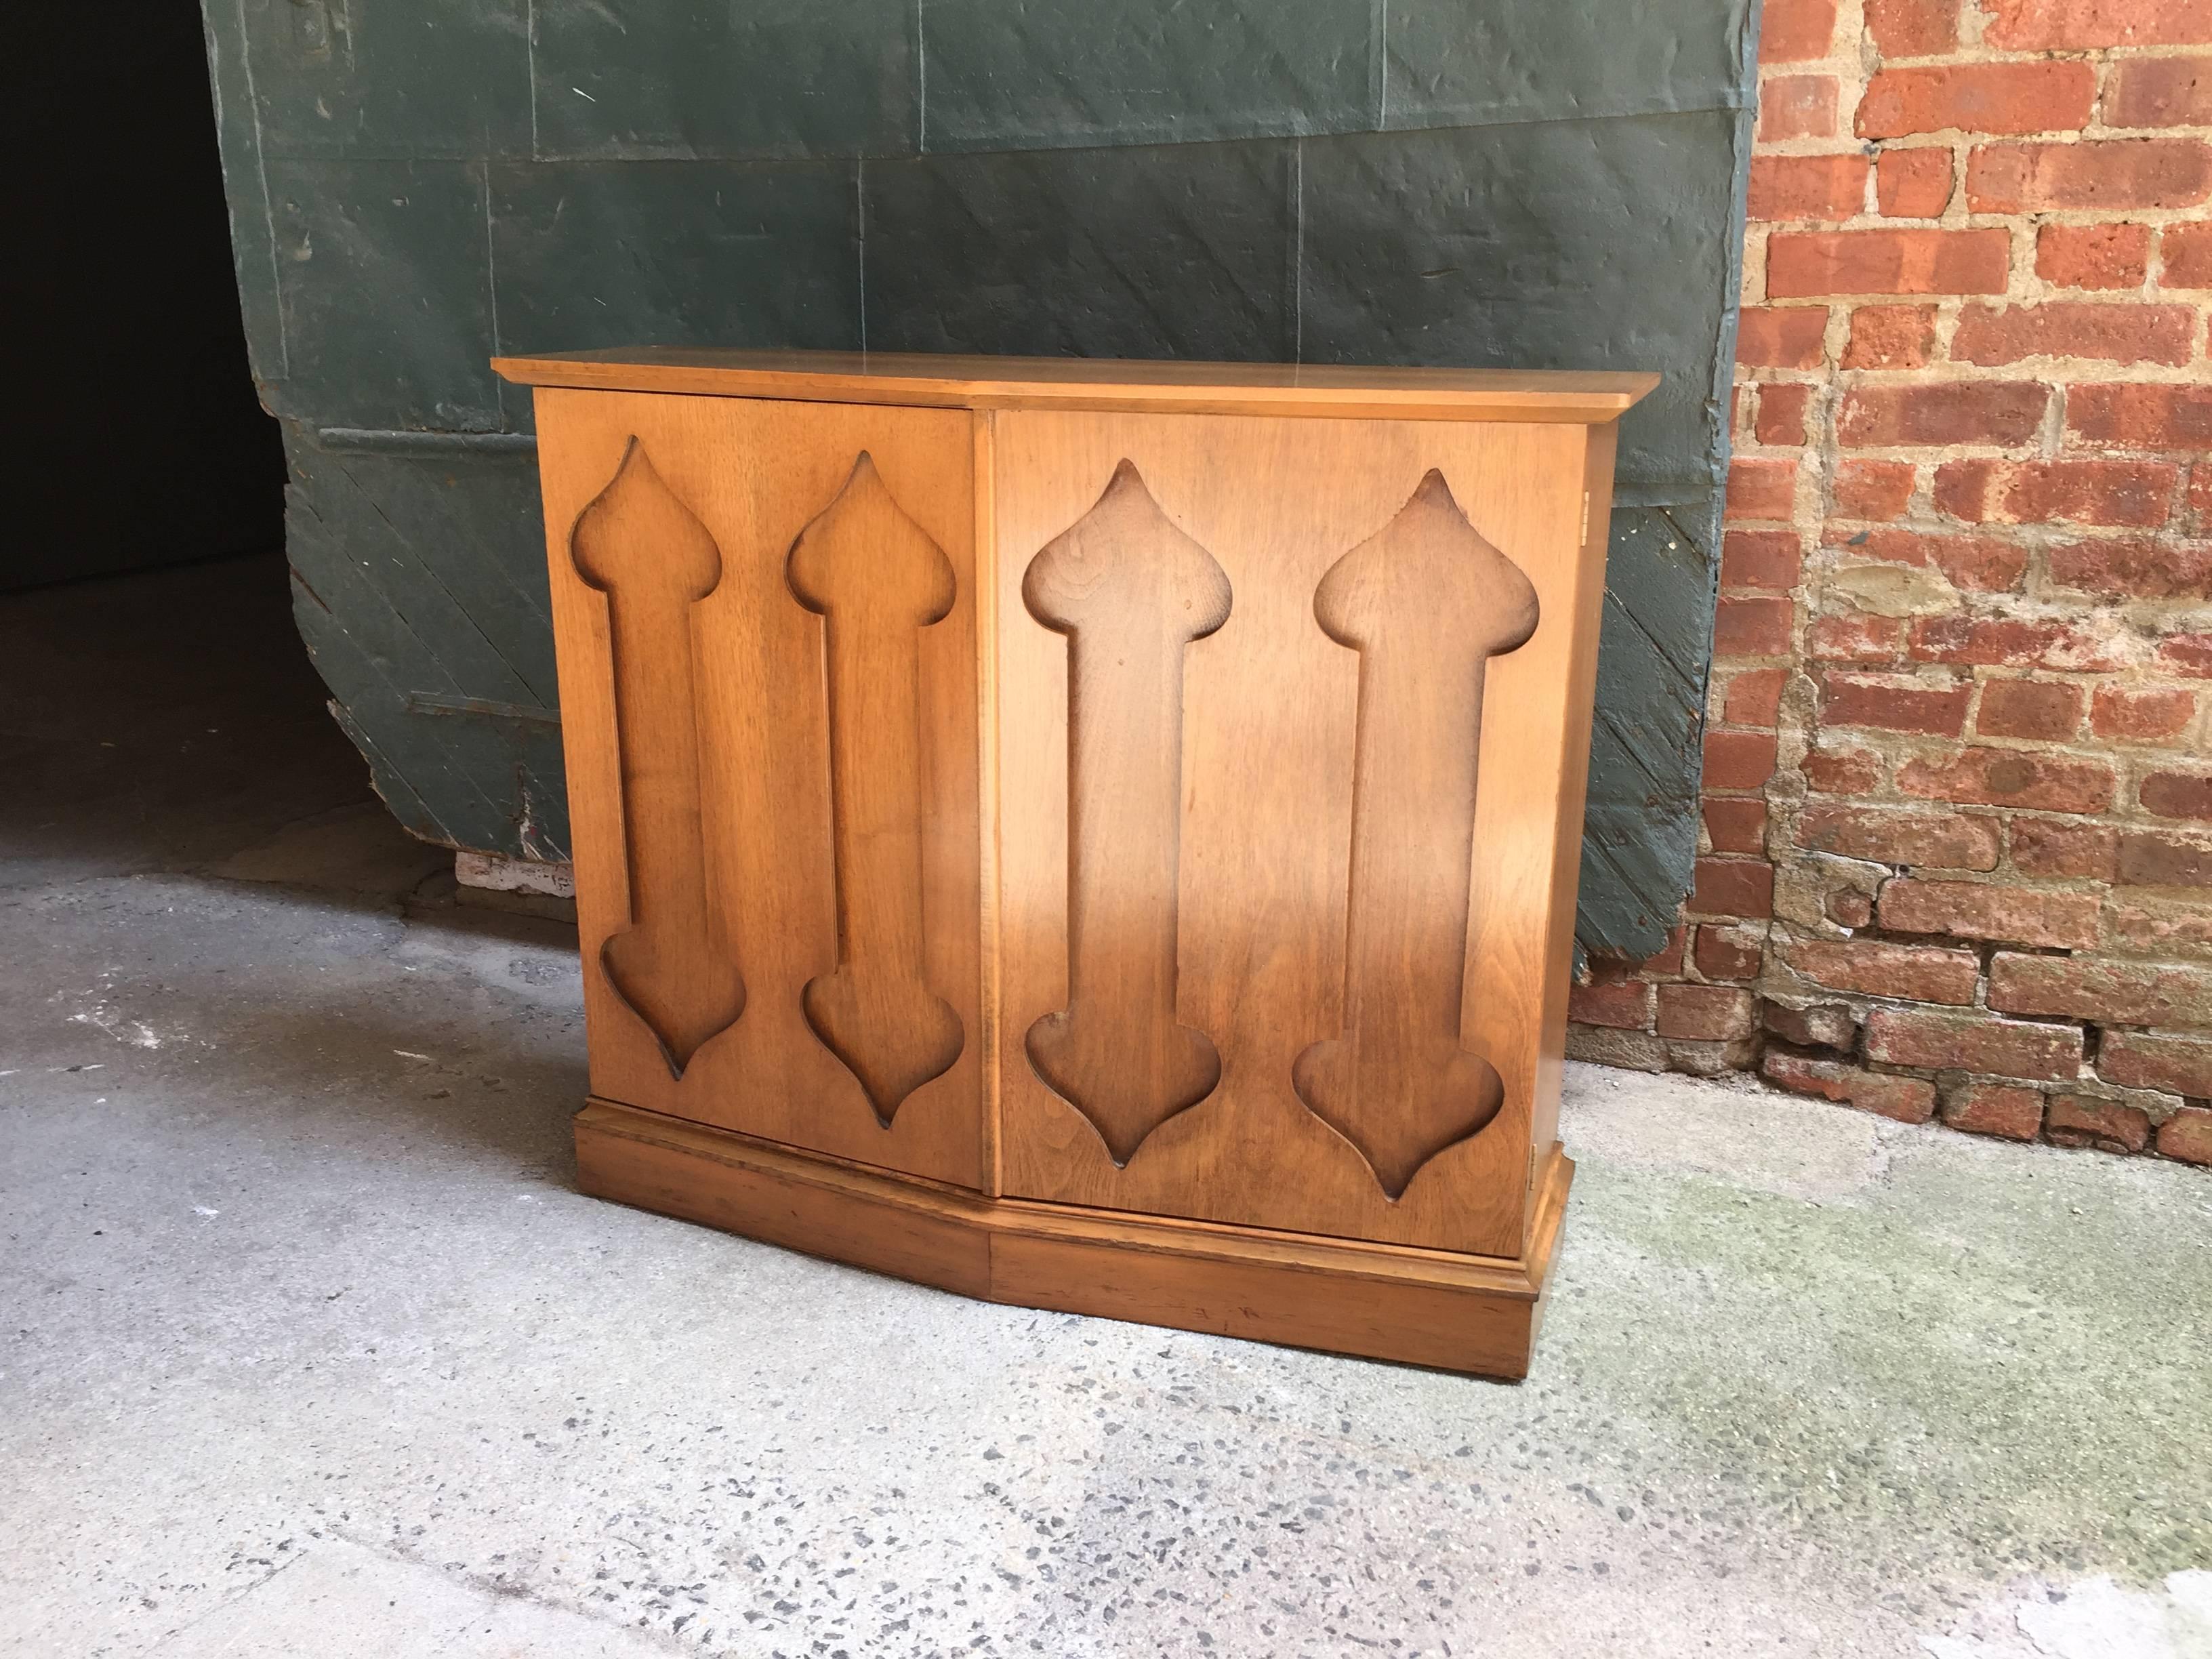 Mahogany two-door console cabinet with recessed trefoil design accents. Single stationary shelf interior. Chevron shaped top and cabinet, circa 1970. Unsigned.